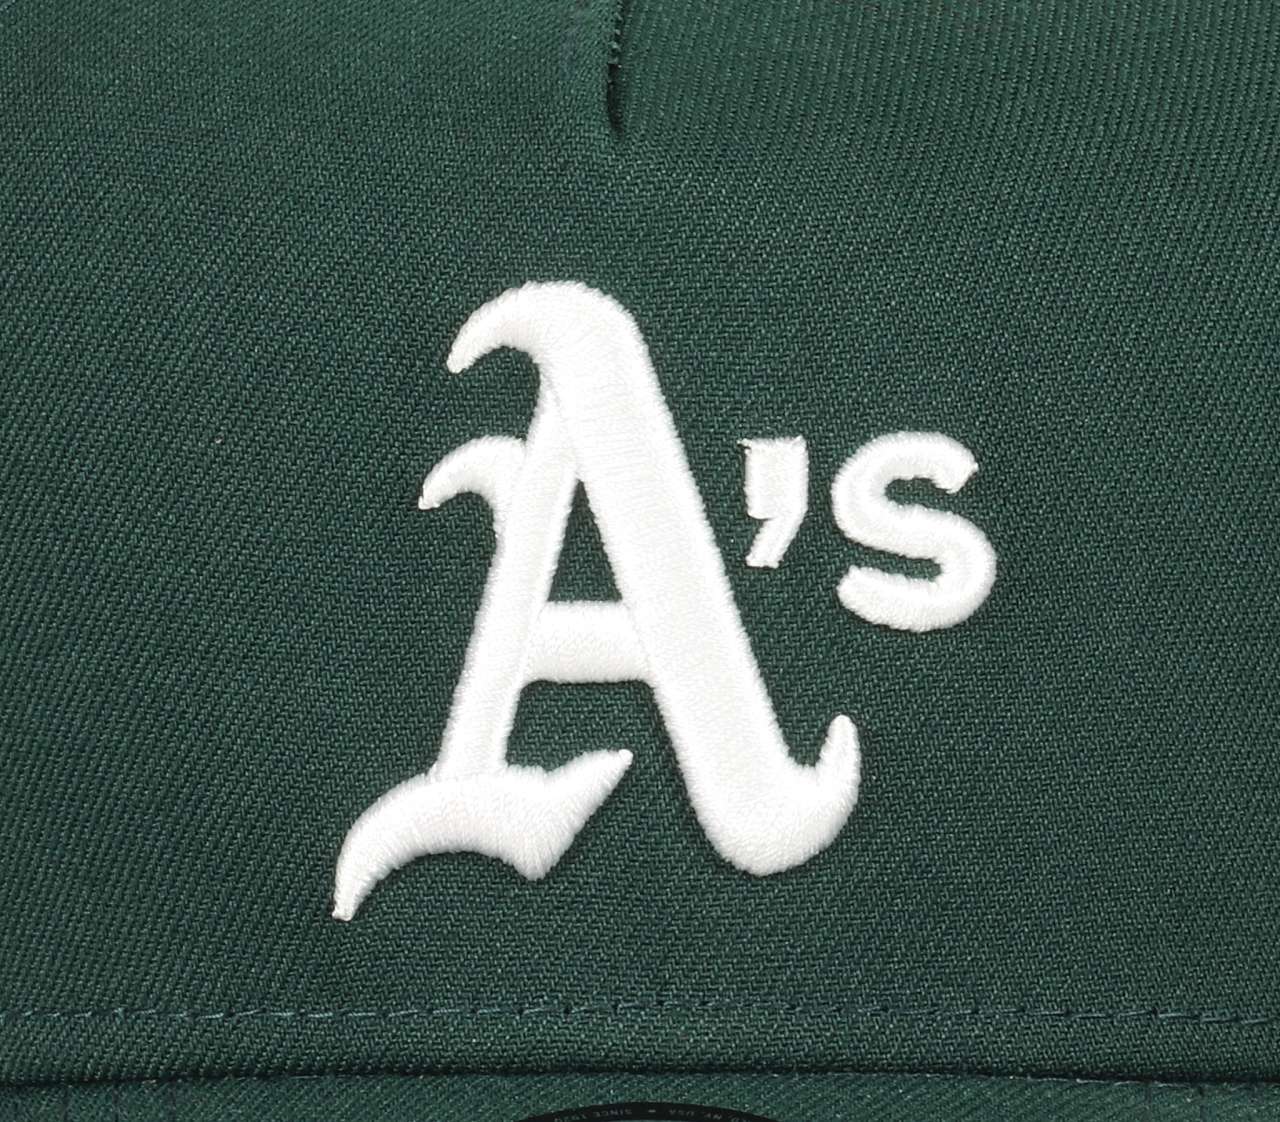 Oakland Athletics MLB World Series 1989 Sidepatch Cooperstown Dark Green 9Forty A-Frame Snapback Cap New Era